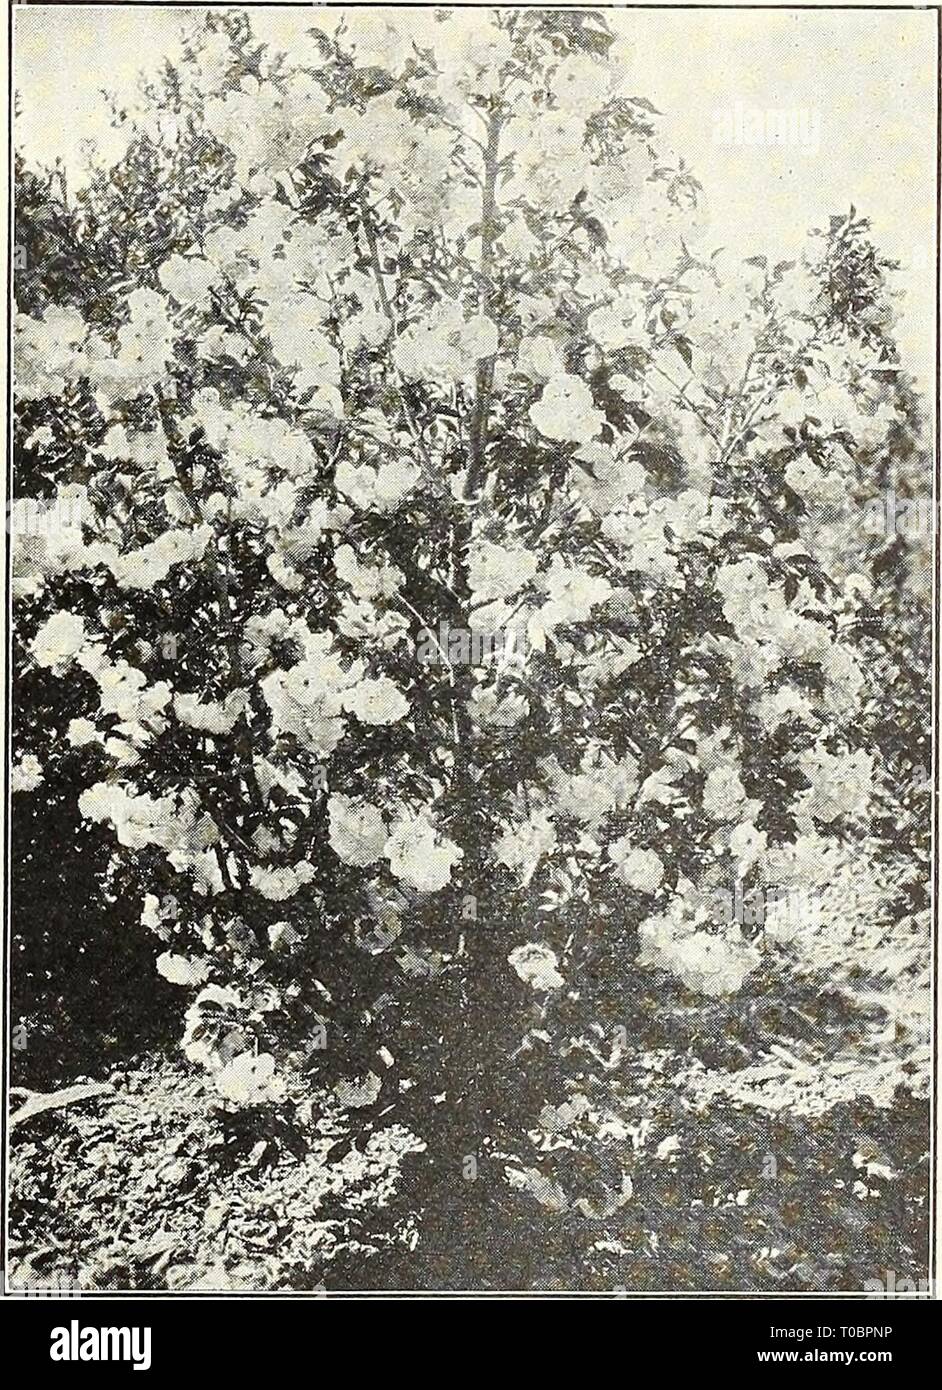 Dreer's garden book 1930 (1930) Dreer's garden book 1930 dreersgardenbook1930henr Year: 1930  New Red-leaved Japanese Barberry Abelia Chinensis Grandiflora A choice small Shrub of graceful habit, producing through the entire summer and fall white tinted lilac heather-like flowers in such abundance as to completely cover the plant. Plants from 4-inch pots, SO cts. each Calluna (Scotch Heather) Small evergreen Shrubs growing one to two feet high, with small bell-shaped flowers in great profusion from July to September. Vulgaris. Rosy pink. — Alba. Pure white. — — Aurea. A pretty gold leaved form Stock Photo